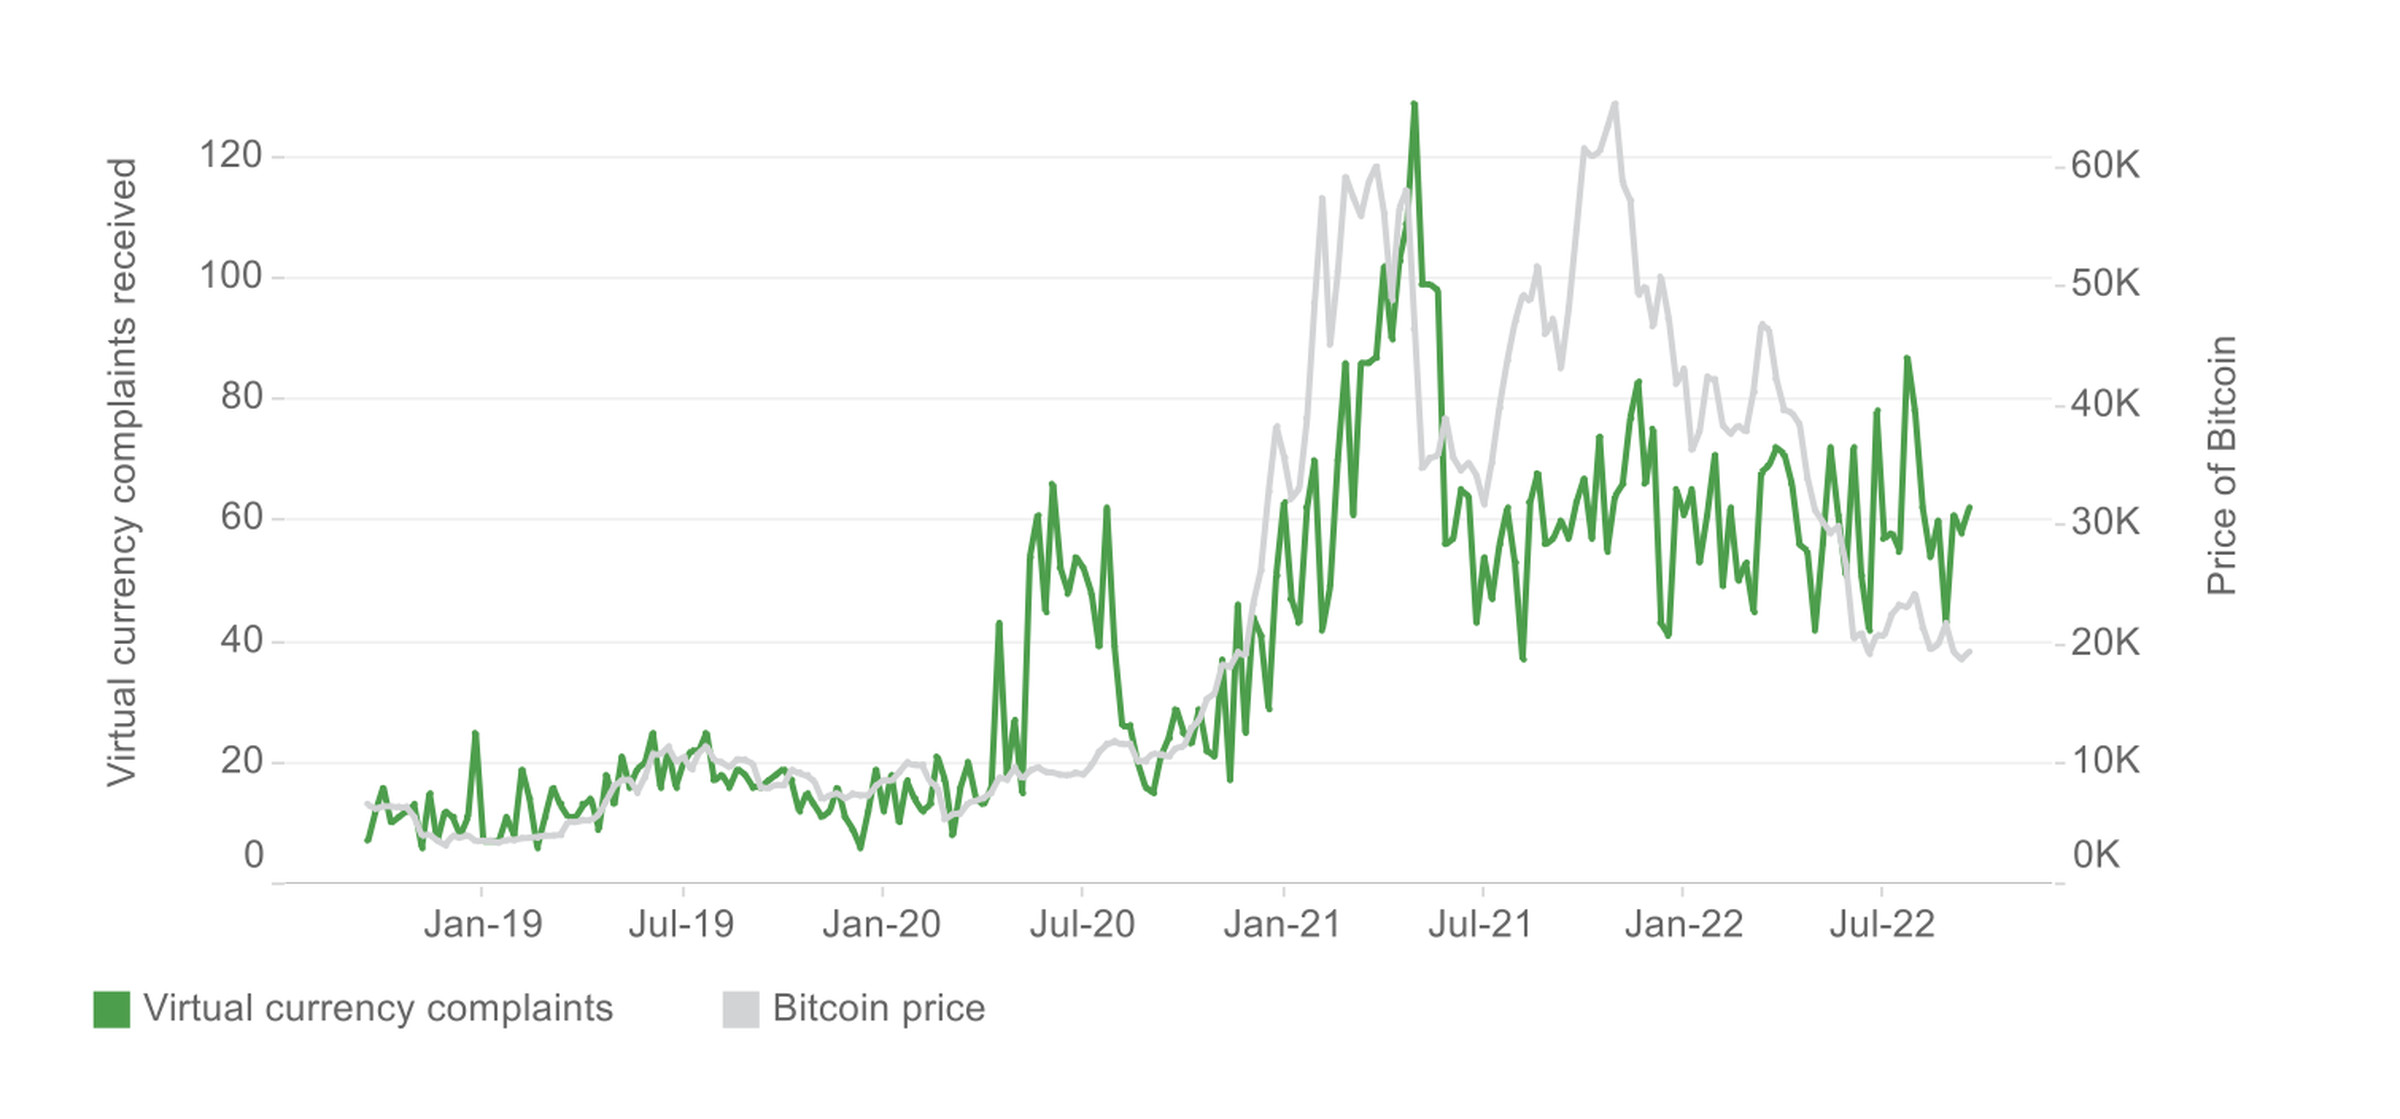 Chart that shows the price of Bitcoin rising between January 2019 and July 2022, along with the number of virtual currency complaints.